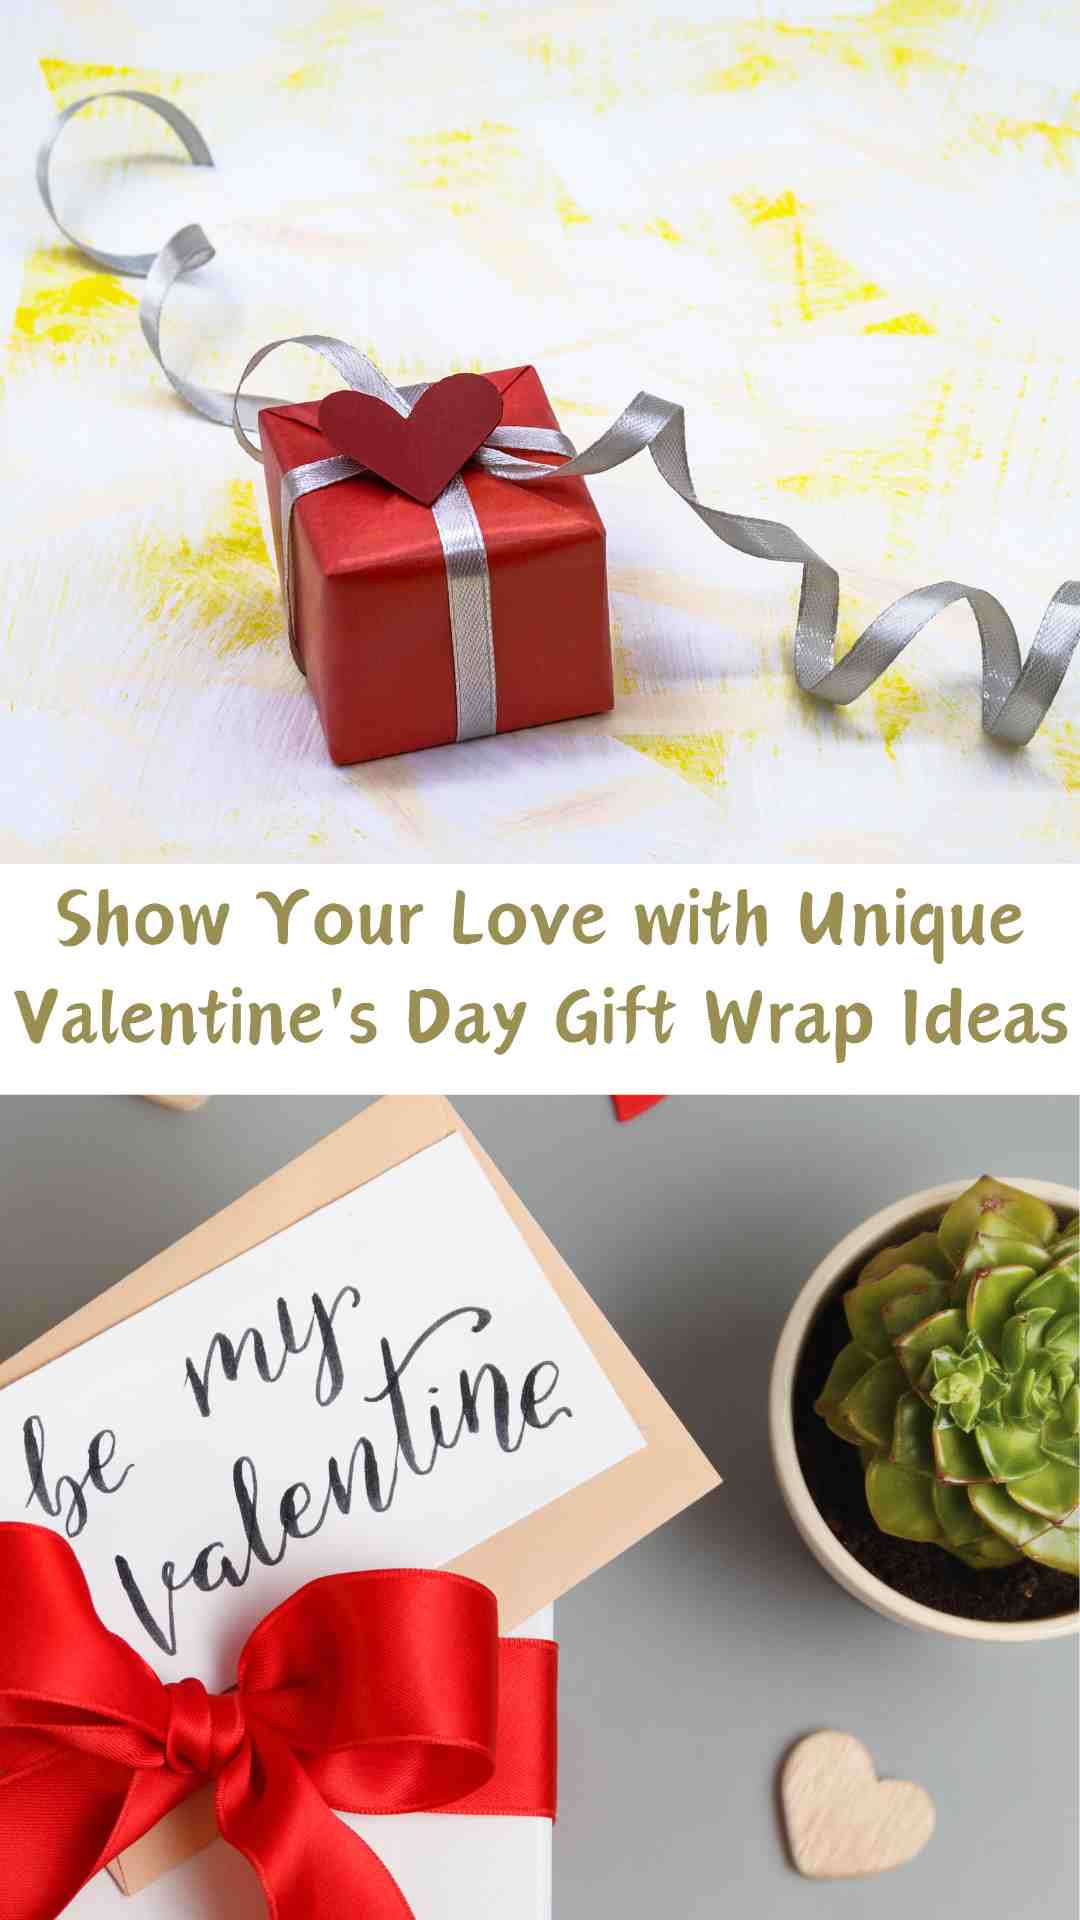 Show Your Love with Unique Valentine's Day Gift Wrap Ideas